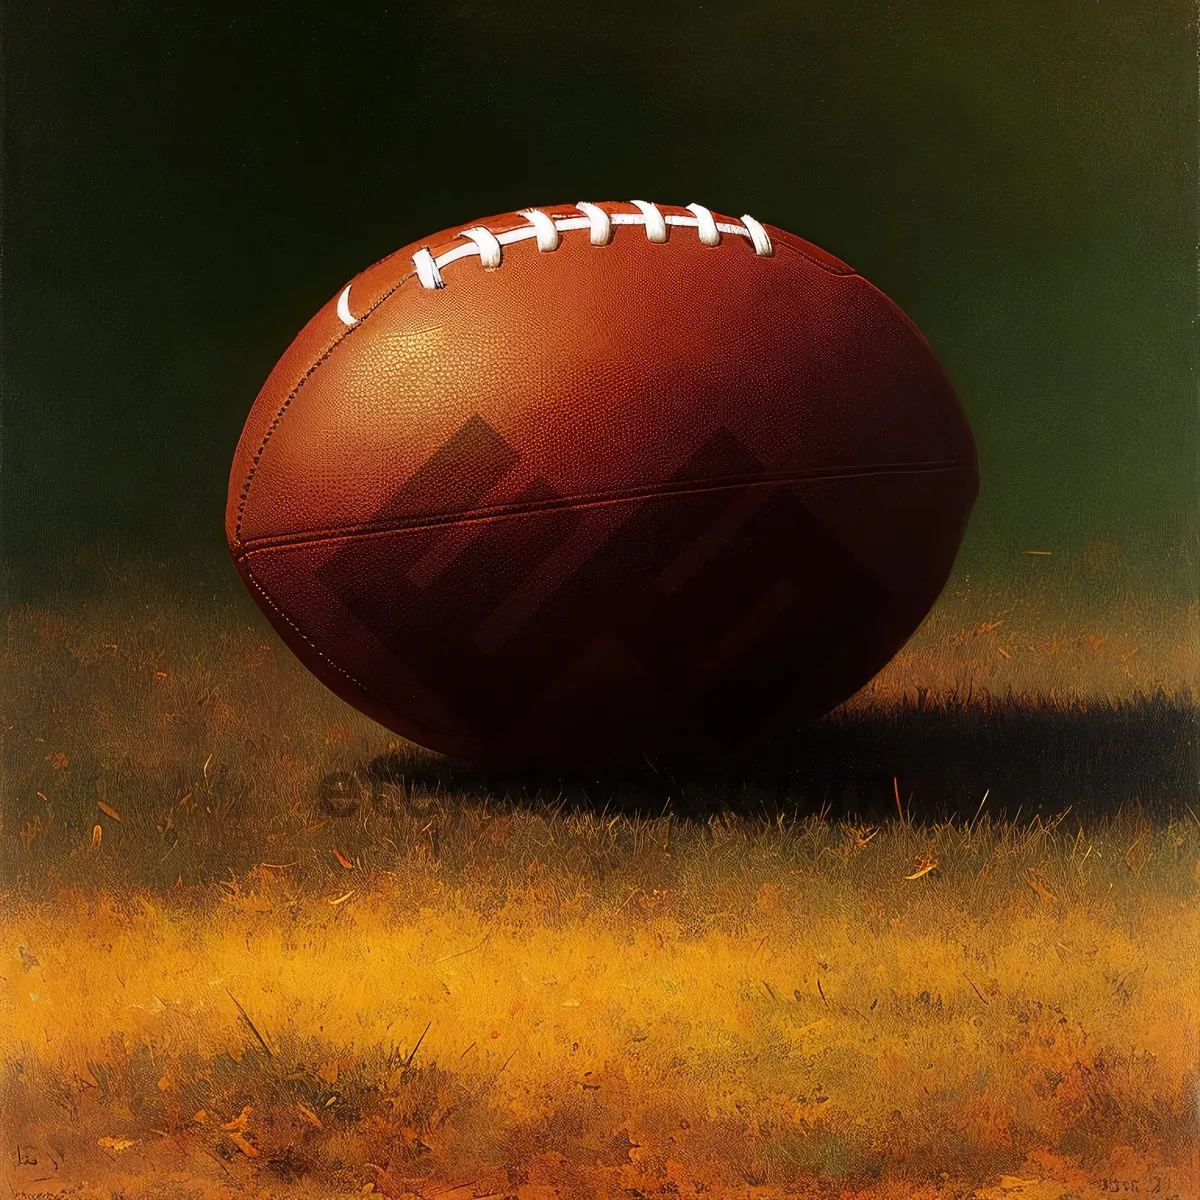 Picture of Team Sports Equipment on a Grass Field